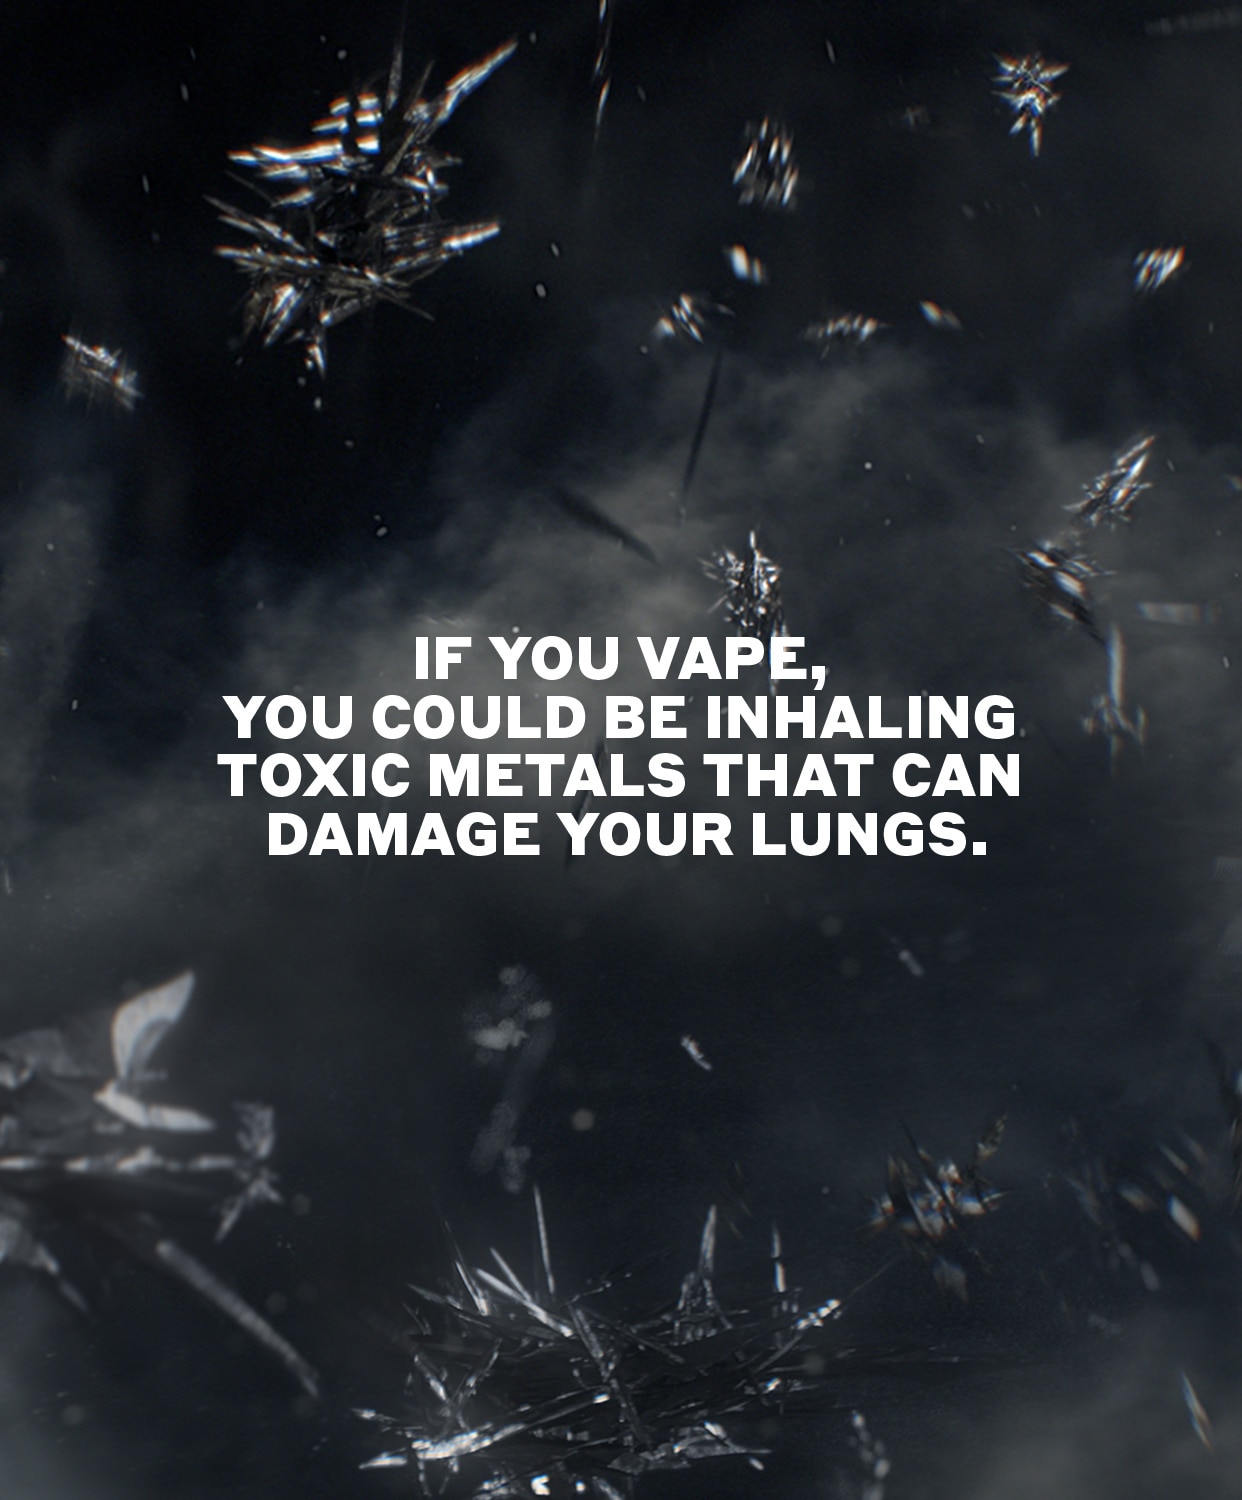 If you vape, you could be inhaling toxic metals that can damage your lungs.